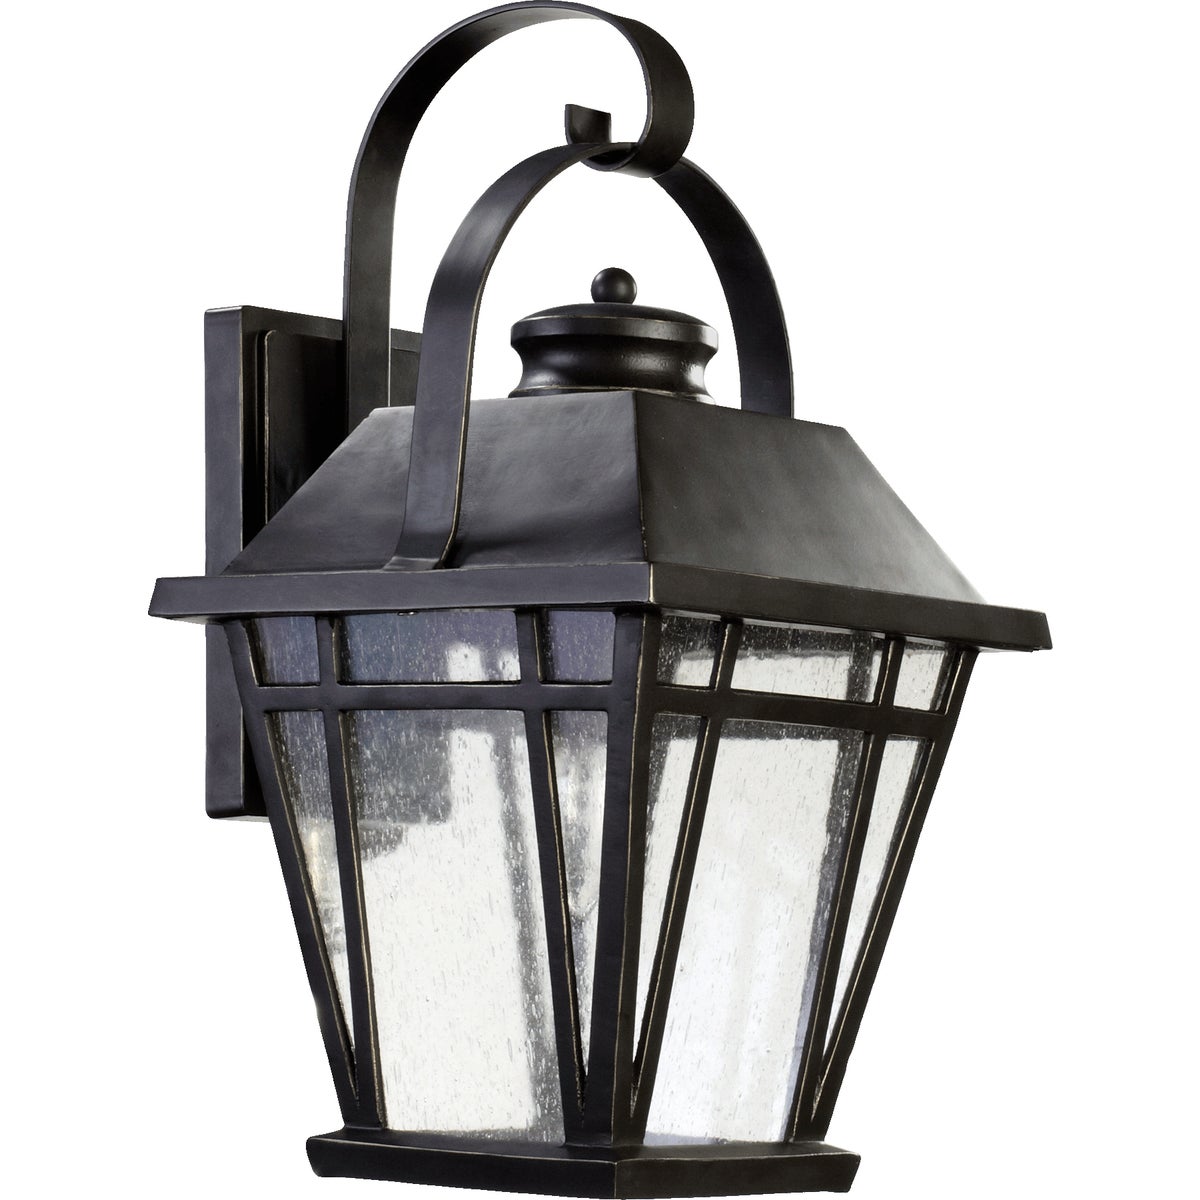 A traditional outdoor wall light with clear seeded glass panes and a vintage frame, adding rustic charm to your outdoor space.